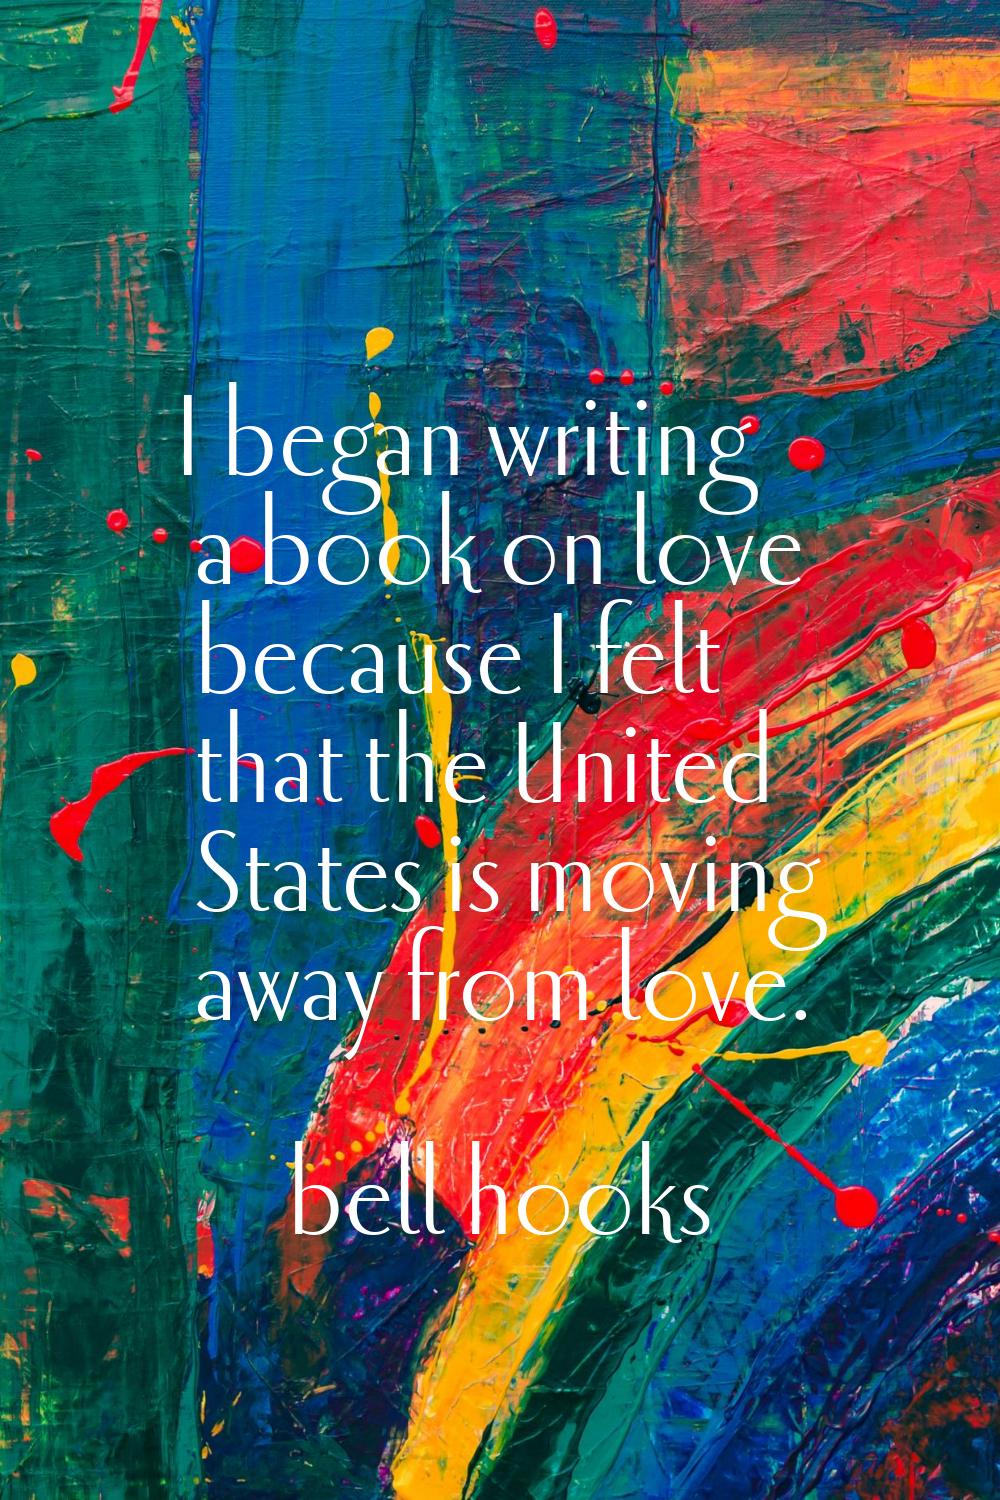 I began writing a book on love because I felt that the United States is moving away from love.